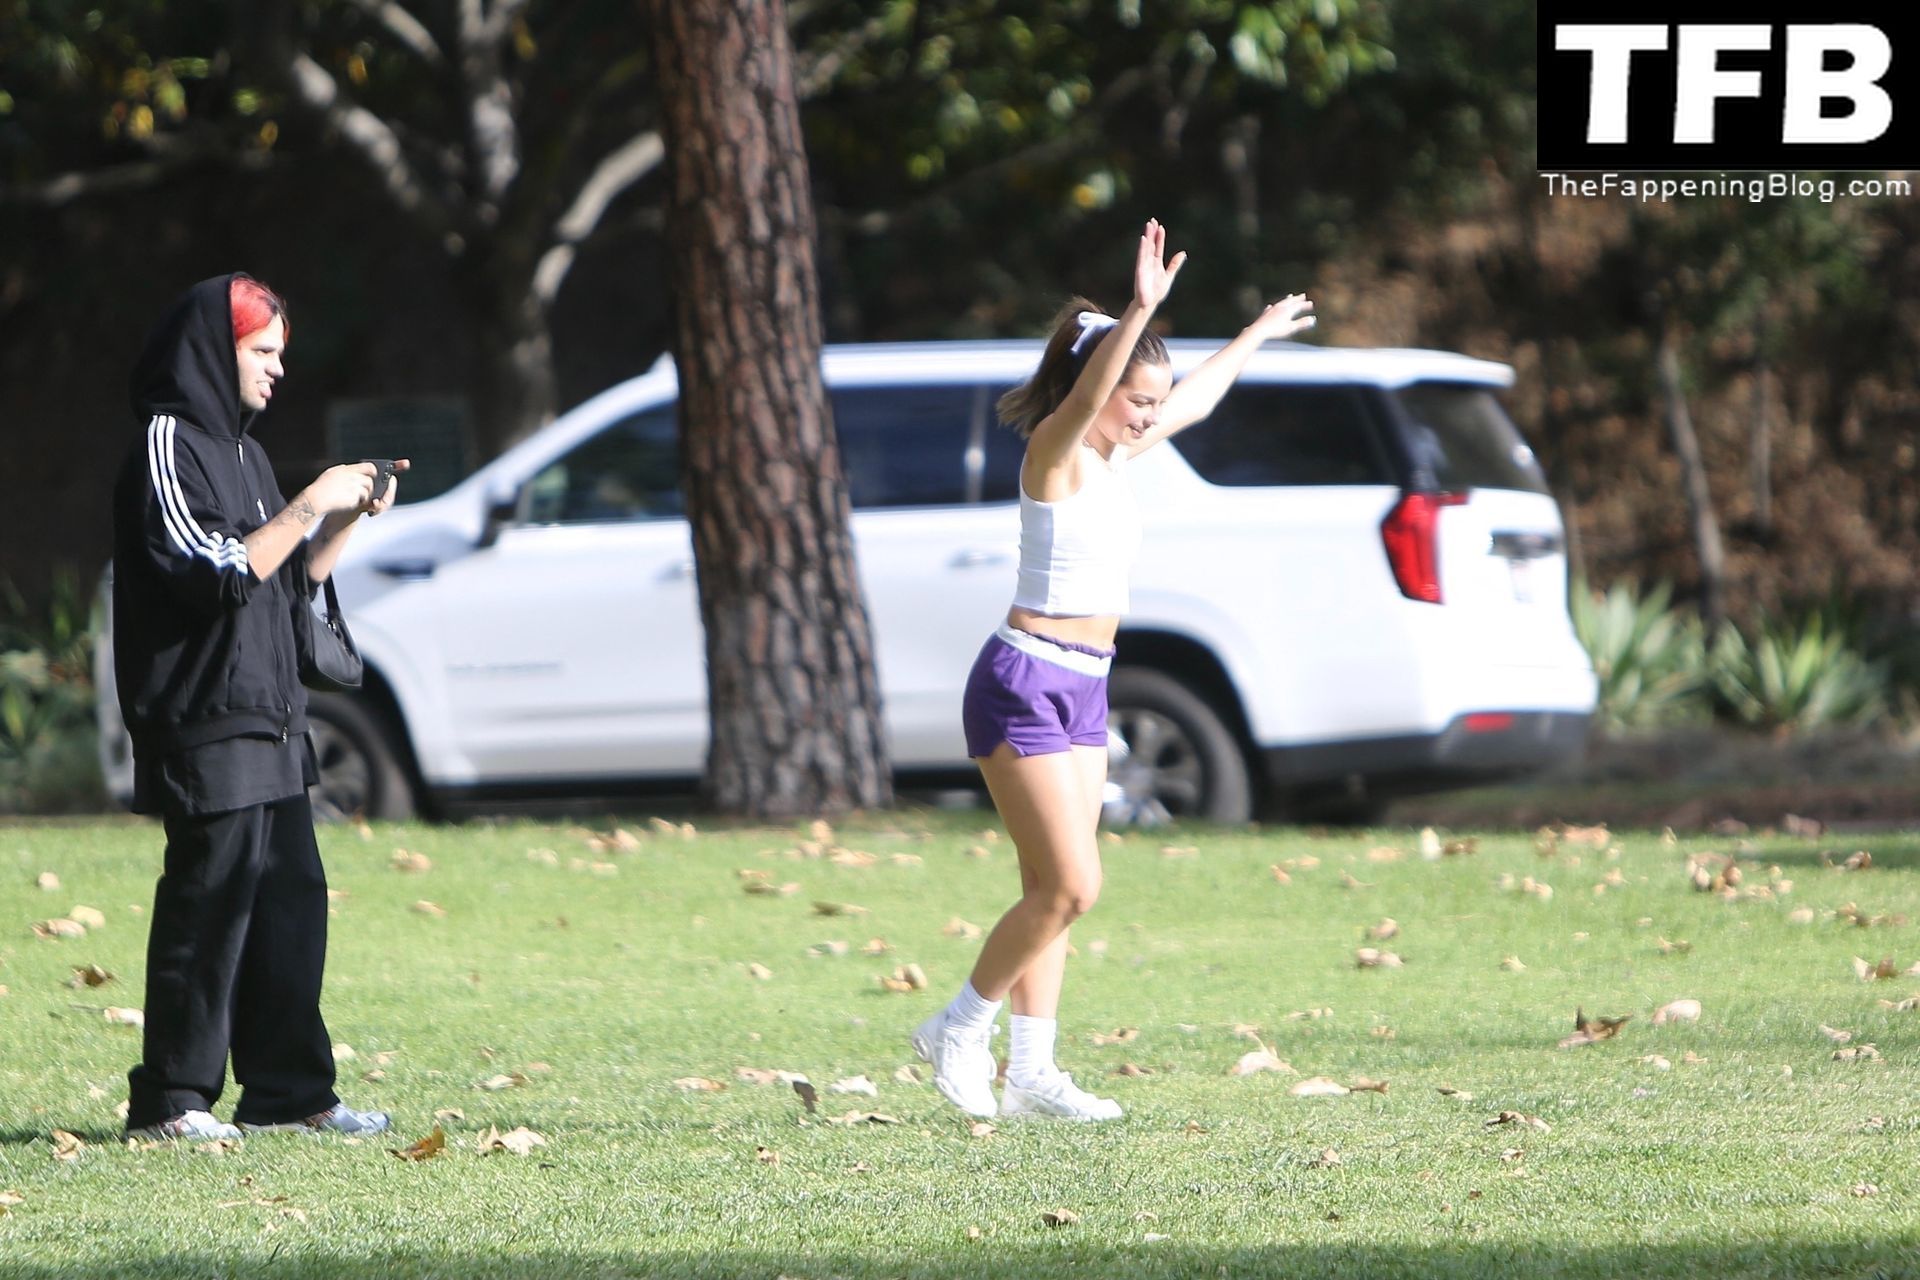 Addison Rae &amp; Omer Fedi Enjoy a Sunny Day in a Park in Beverly Hills (92 Photos)